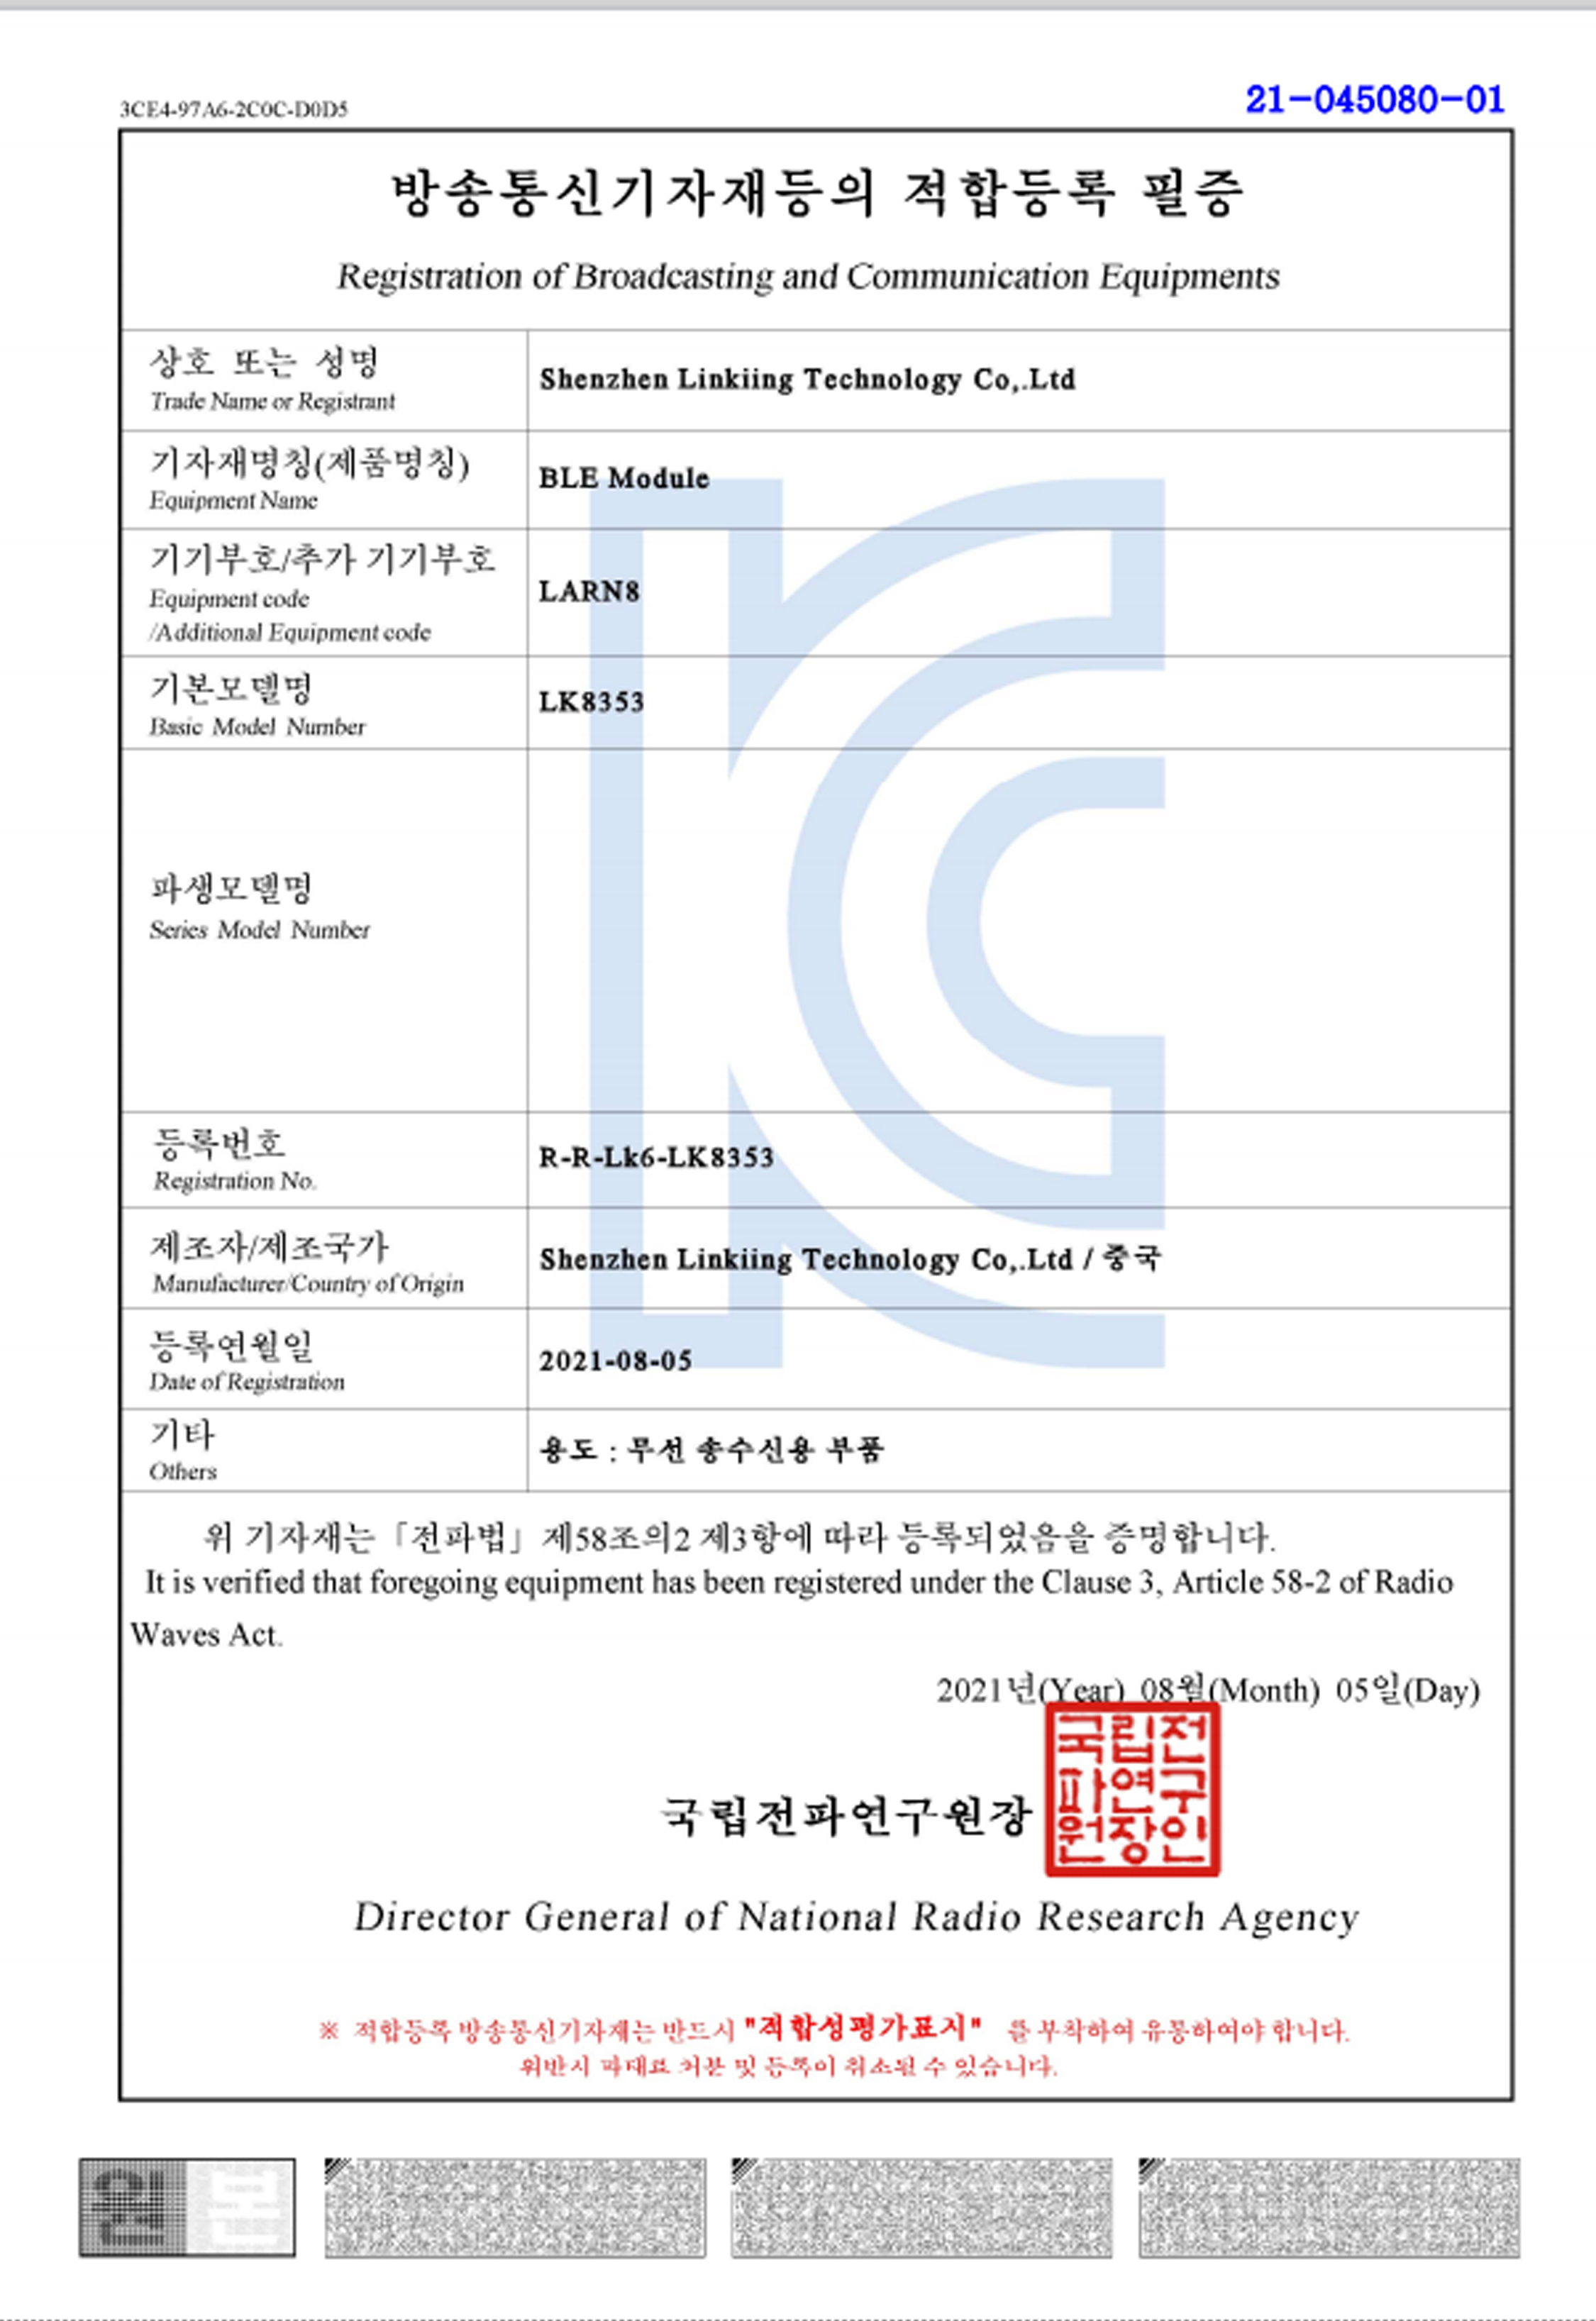 KC:Registration of Broadcasting and Communication Equipiments证书